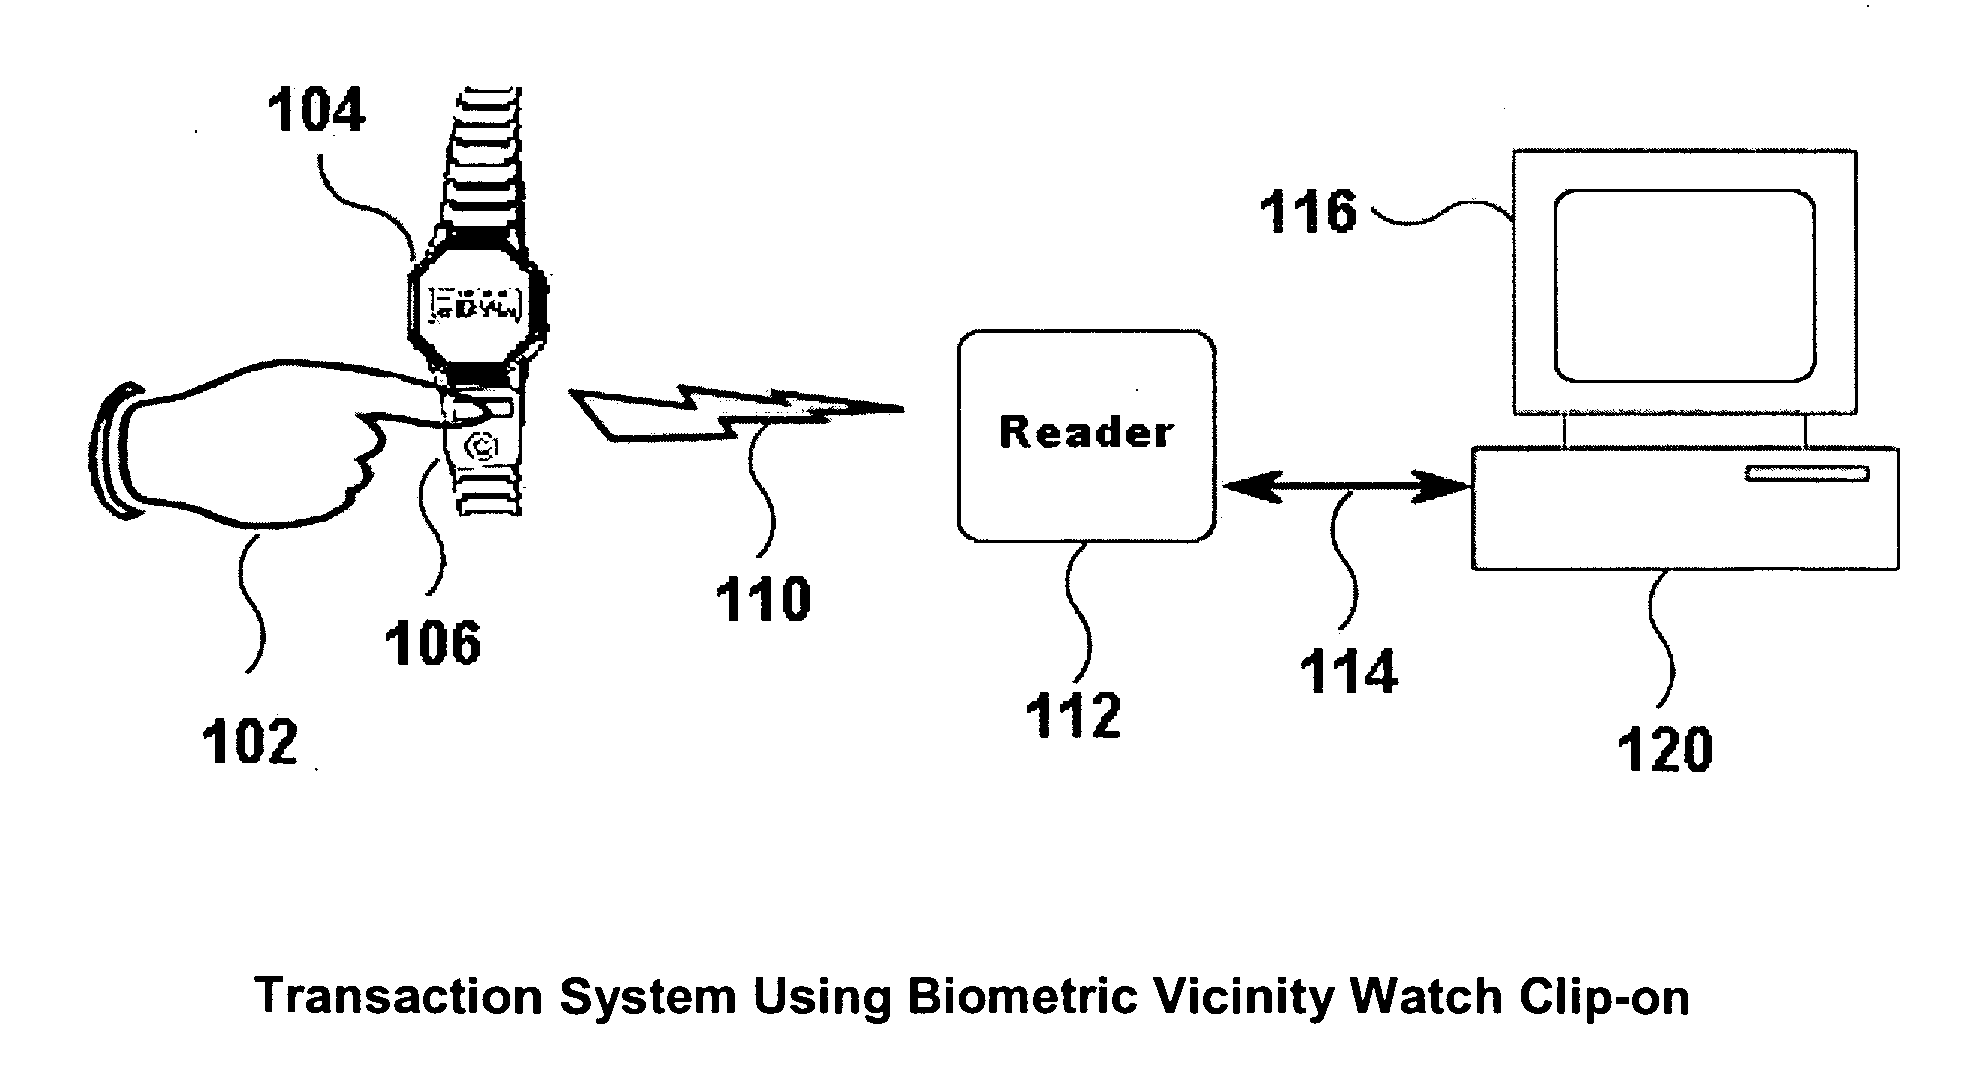 Attachable biometric authentication apparatus for watchbands and other personal items